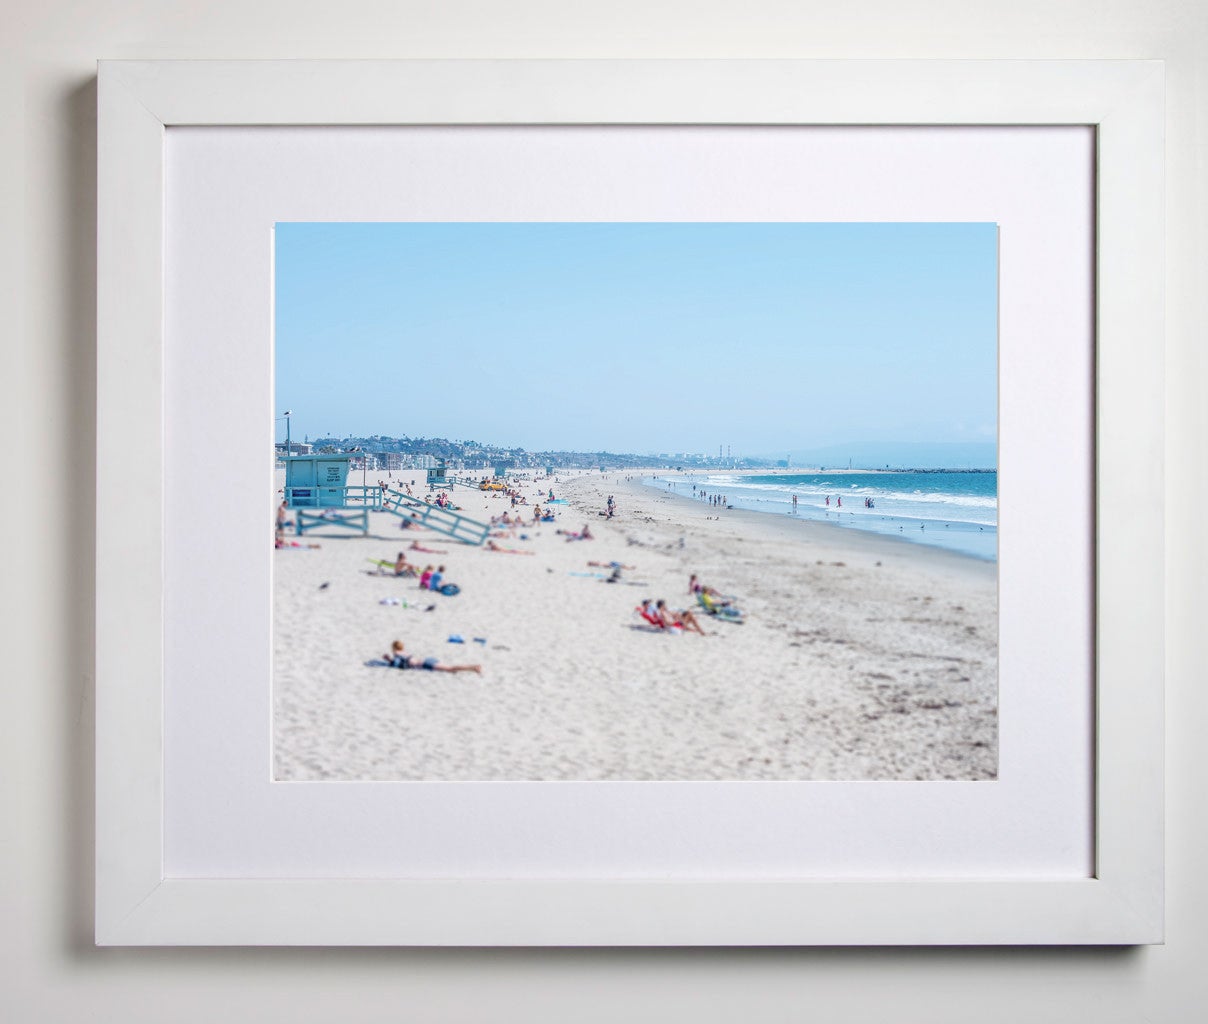 This price and size includes the frame. Framing options are: white, black, natural and aluminum.  Please contact the gallery for pricing of unframed prints and to choose your frame.
Limited edition giclee print on Hahnemuehle paper. Arrives with a